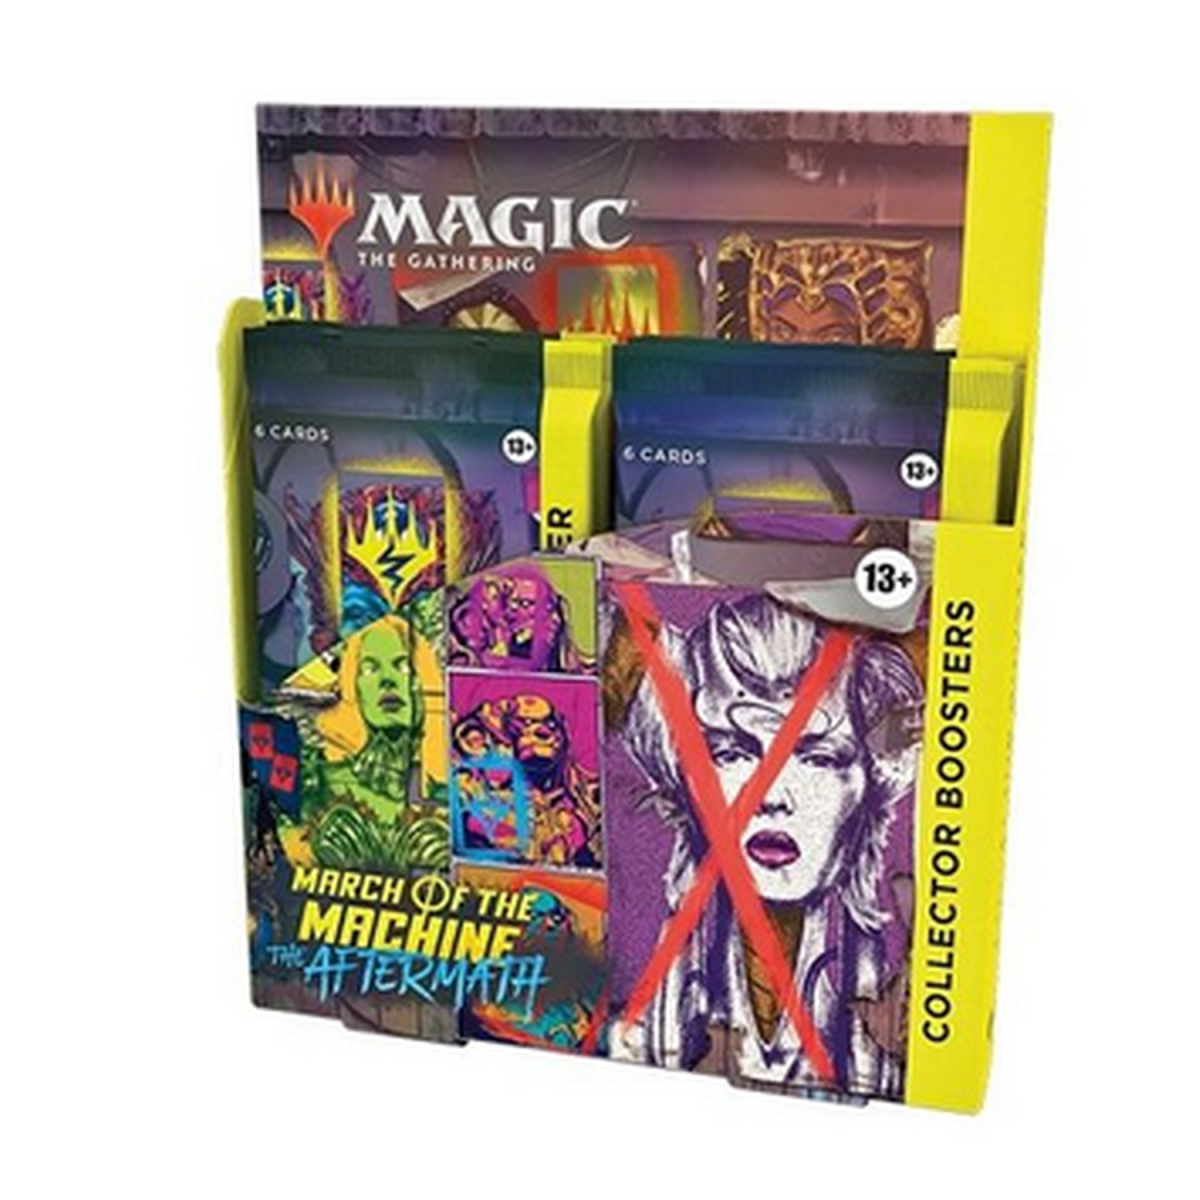 Magic The Gathering – Booster-Box – Sammler – Invasion of the Machines: The Day After Tomorrow – DE